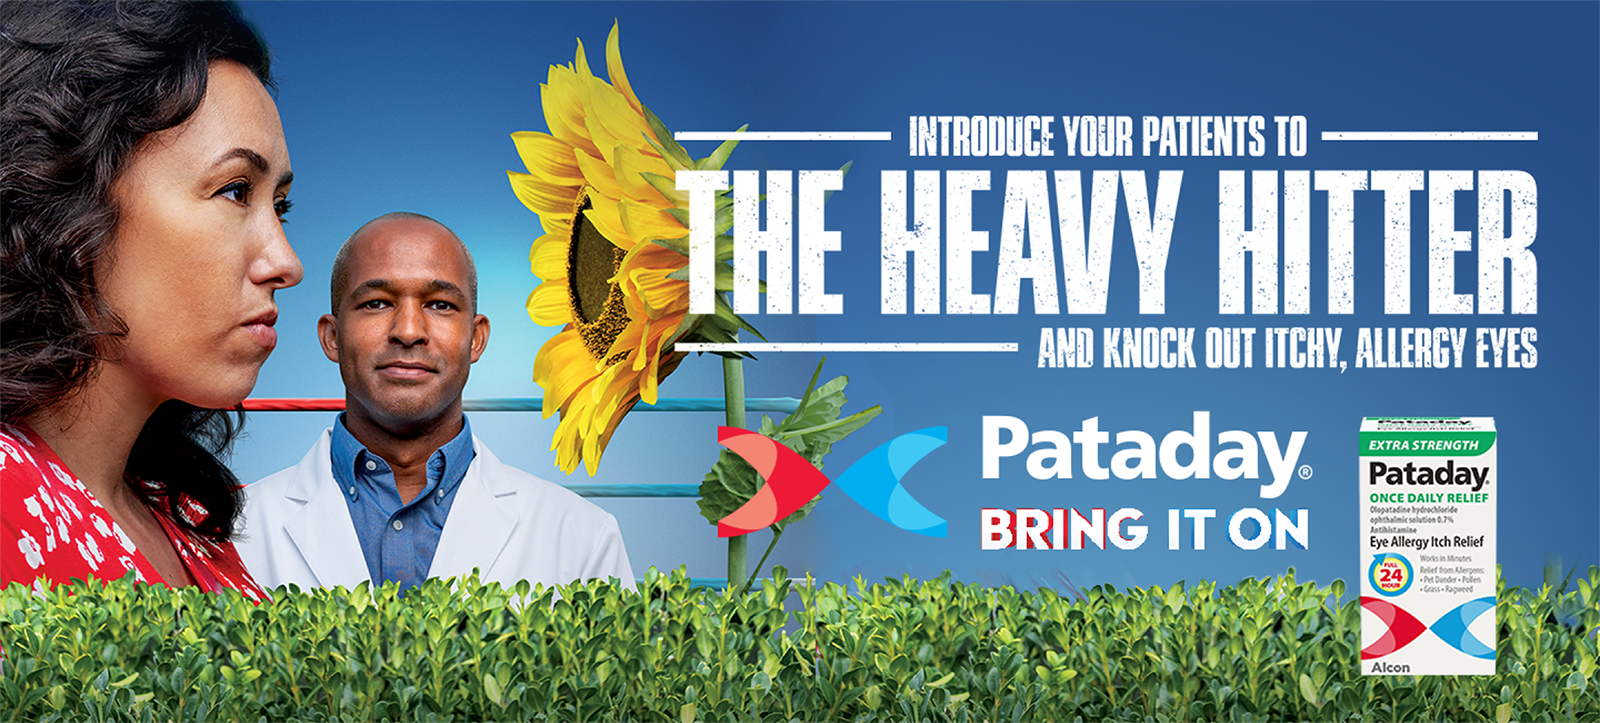 woman standing closely to and looking into a large sun flower with an eye care professional standing behind—and text reading "Introduce your patients to the heavy hitter and knock out itchy, allergy eyes. Pataday bring it on."